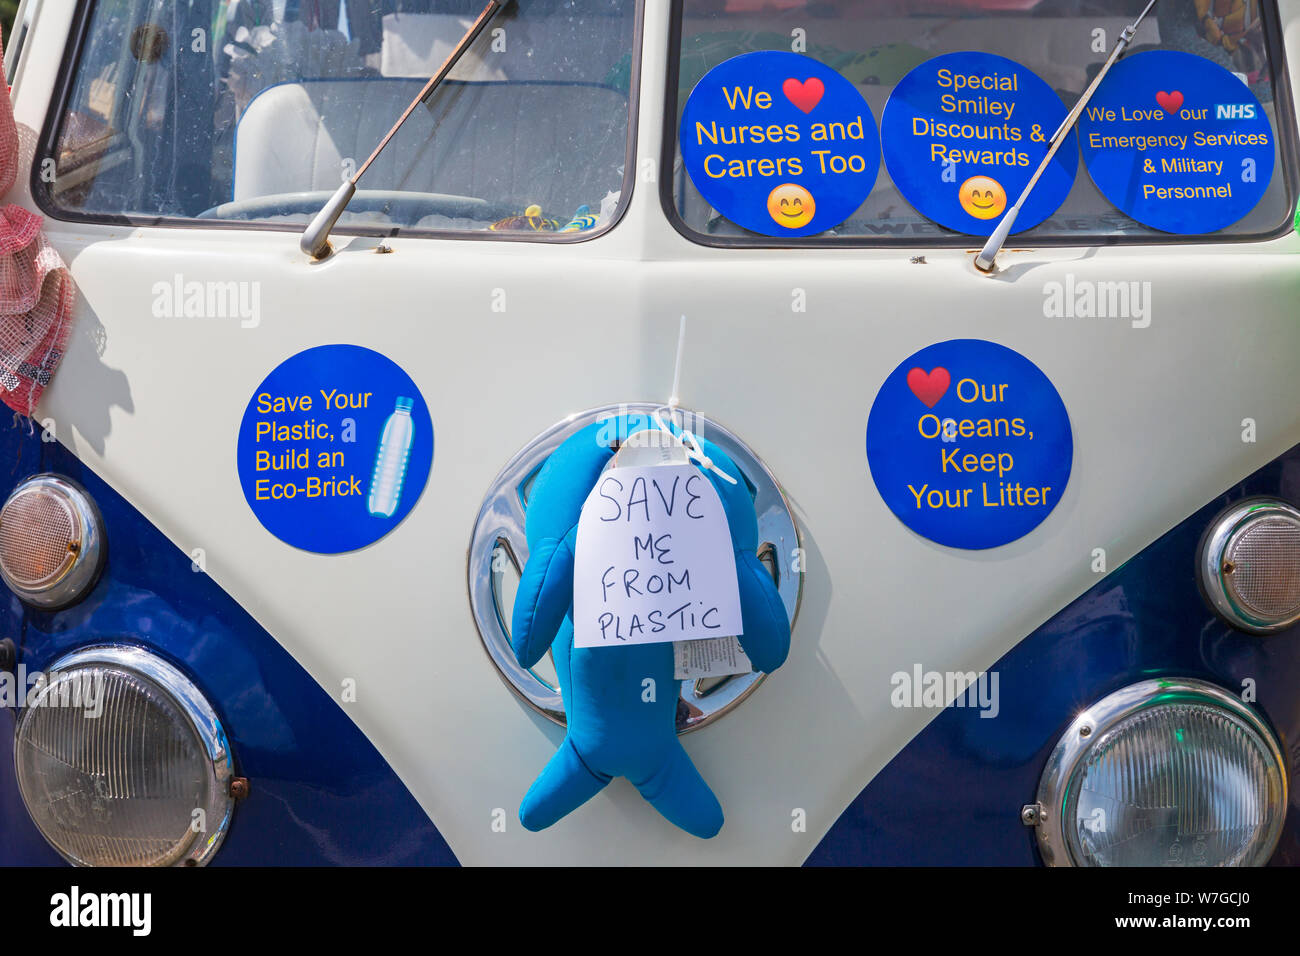 Save me from plastic and stickers with messages on decorated campervan taking part in Swanage carnival parade procession at Swanage, Dorset UK in July Stock Photo